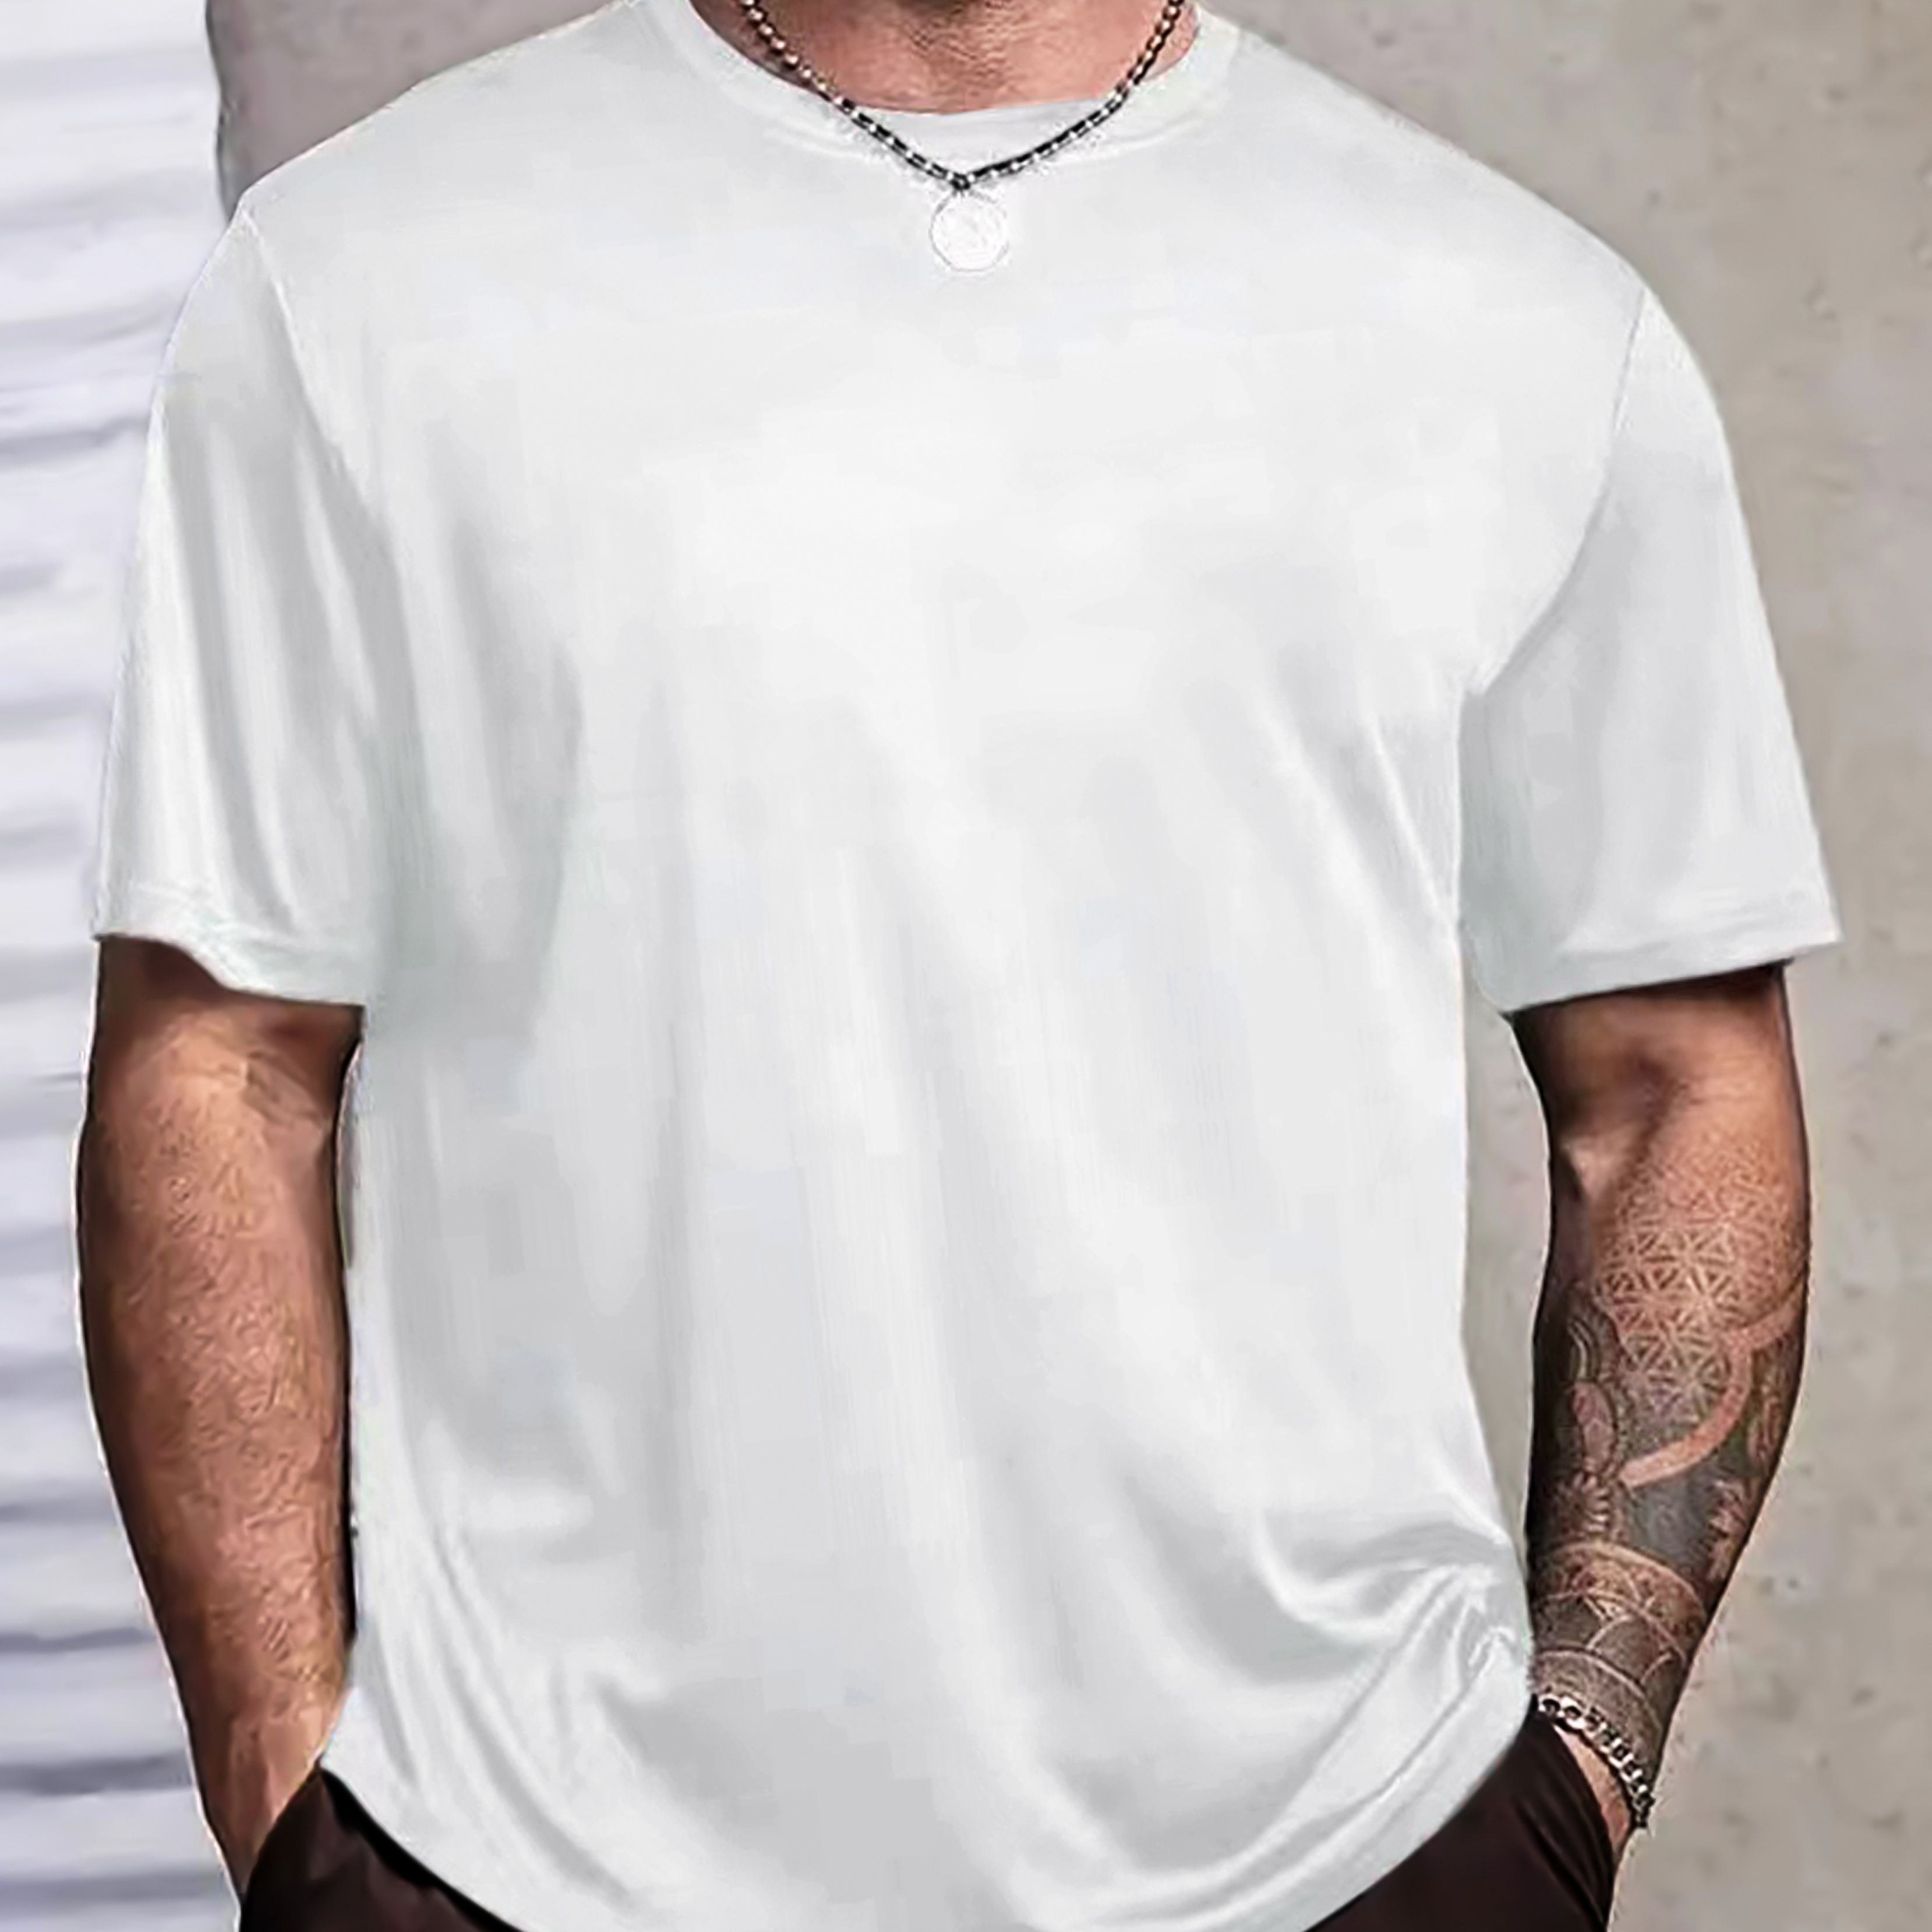 

Plus Size Men's Solid Cotton Blend T-shirt, Summer Trendy Casual Short Sleeve Tees, Outdoor Sports Clothing, Big & Tall Guys, Leisurewear